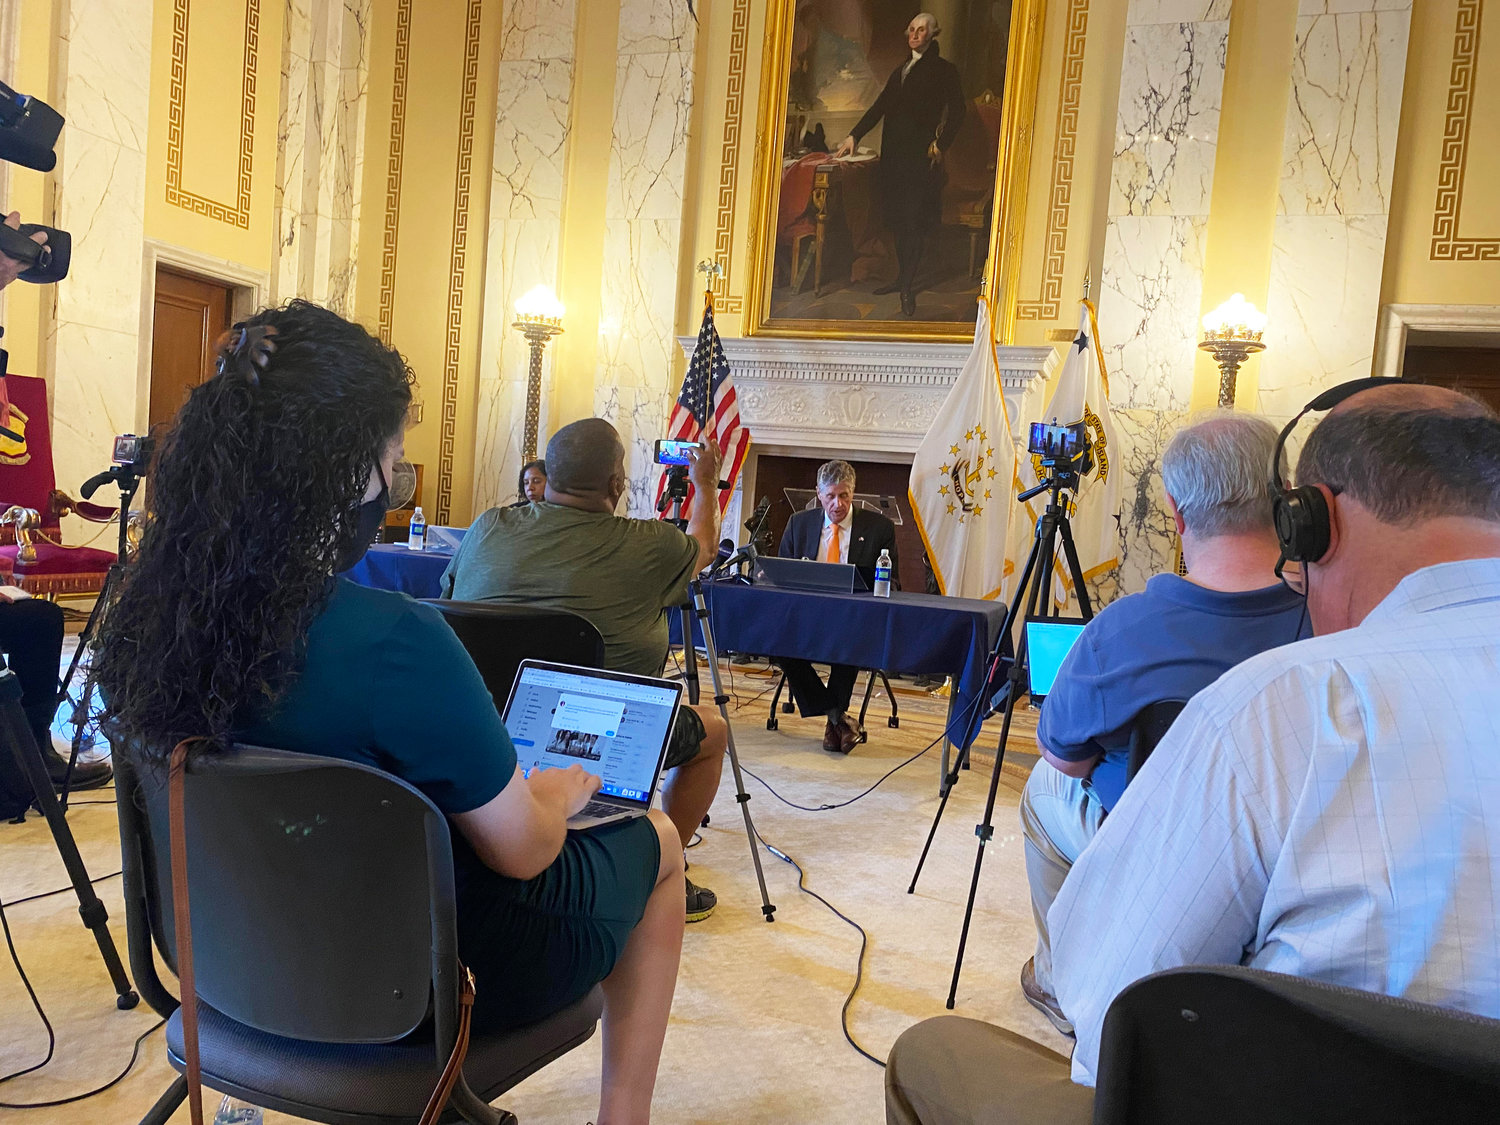 Under the presence of the portrait of George Washington, Gov. Dan McKee accused officials from the Raimondo administration of giving him "a fairy tale" when it came to the proposed budget for Eleanor Slater Hospital at the June 8 news conference held at the State House.